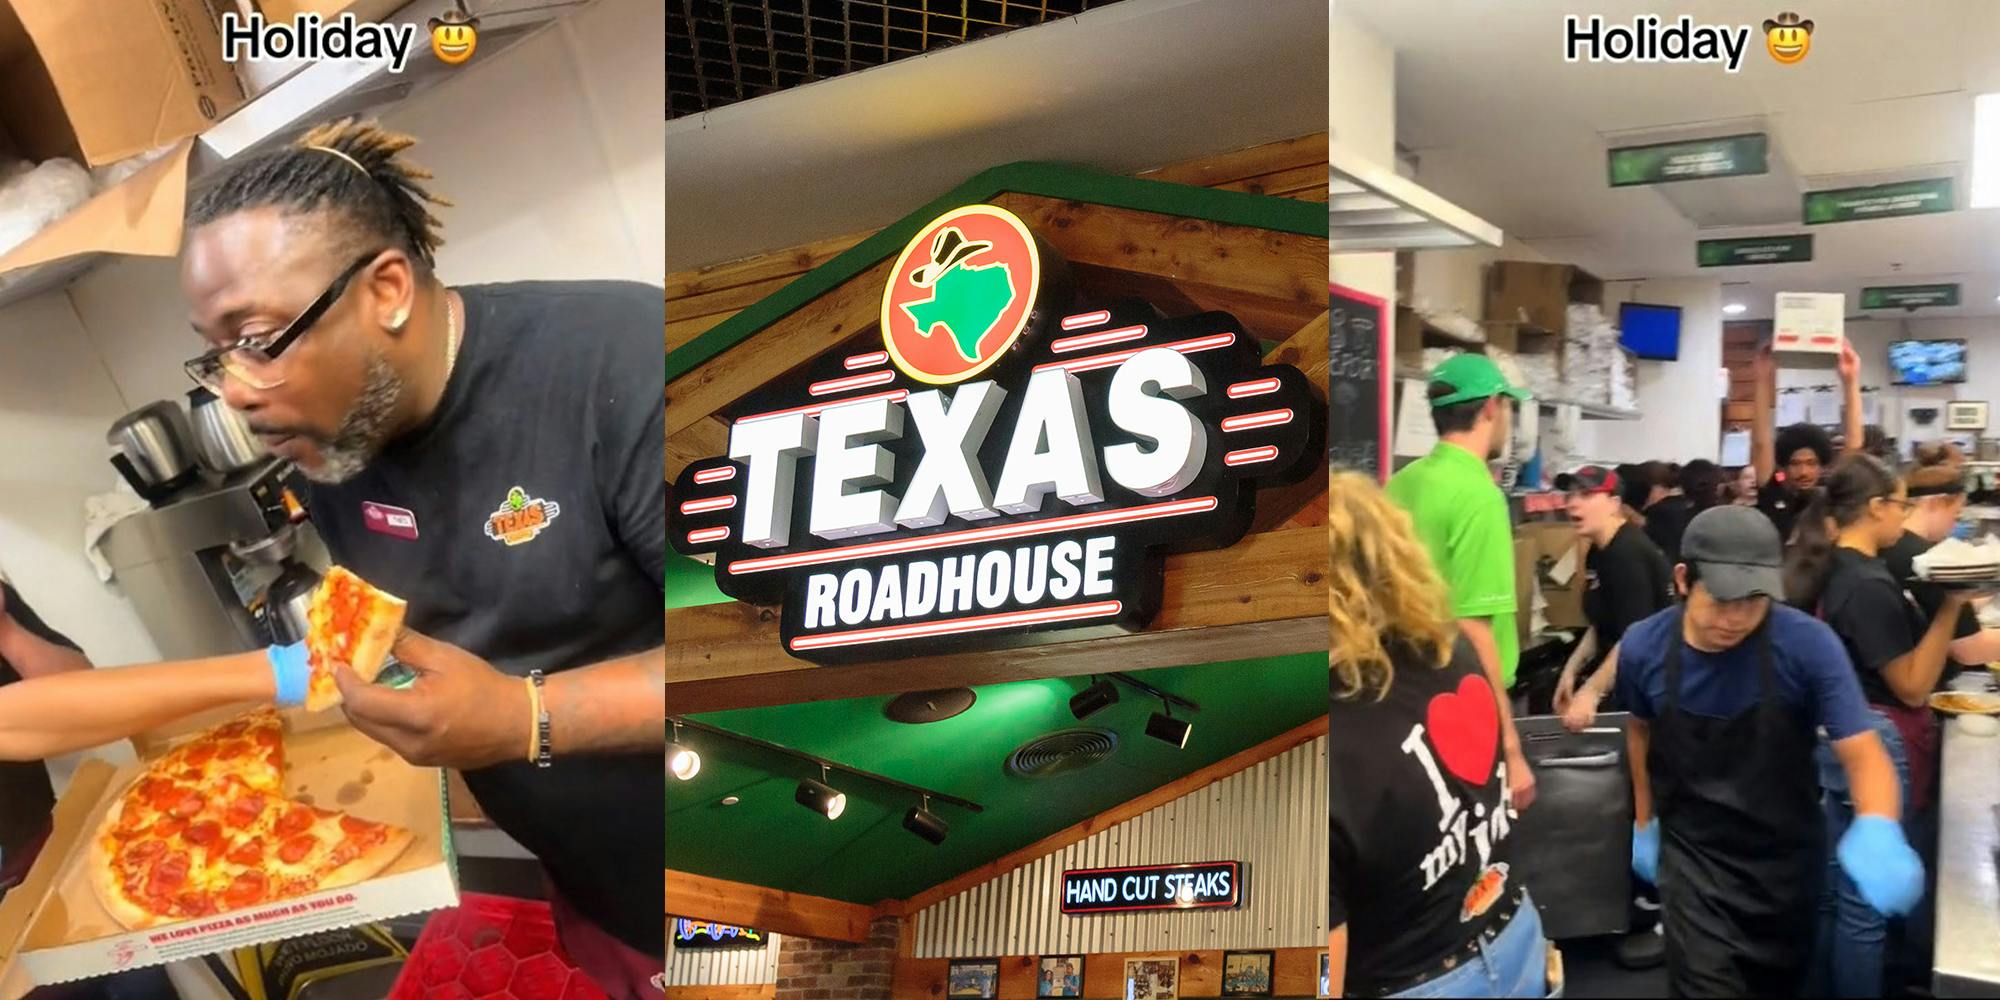 Texas Roadhouse server works 12-hour shift on a holiday